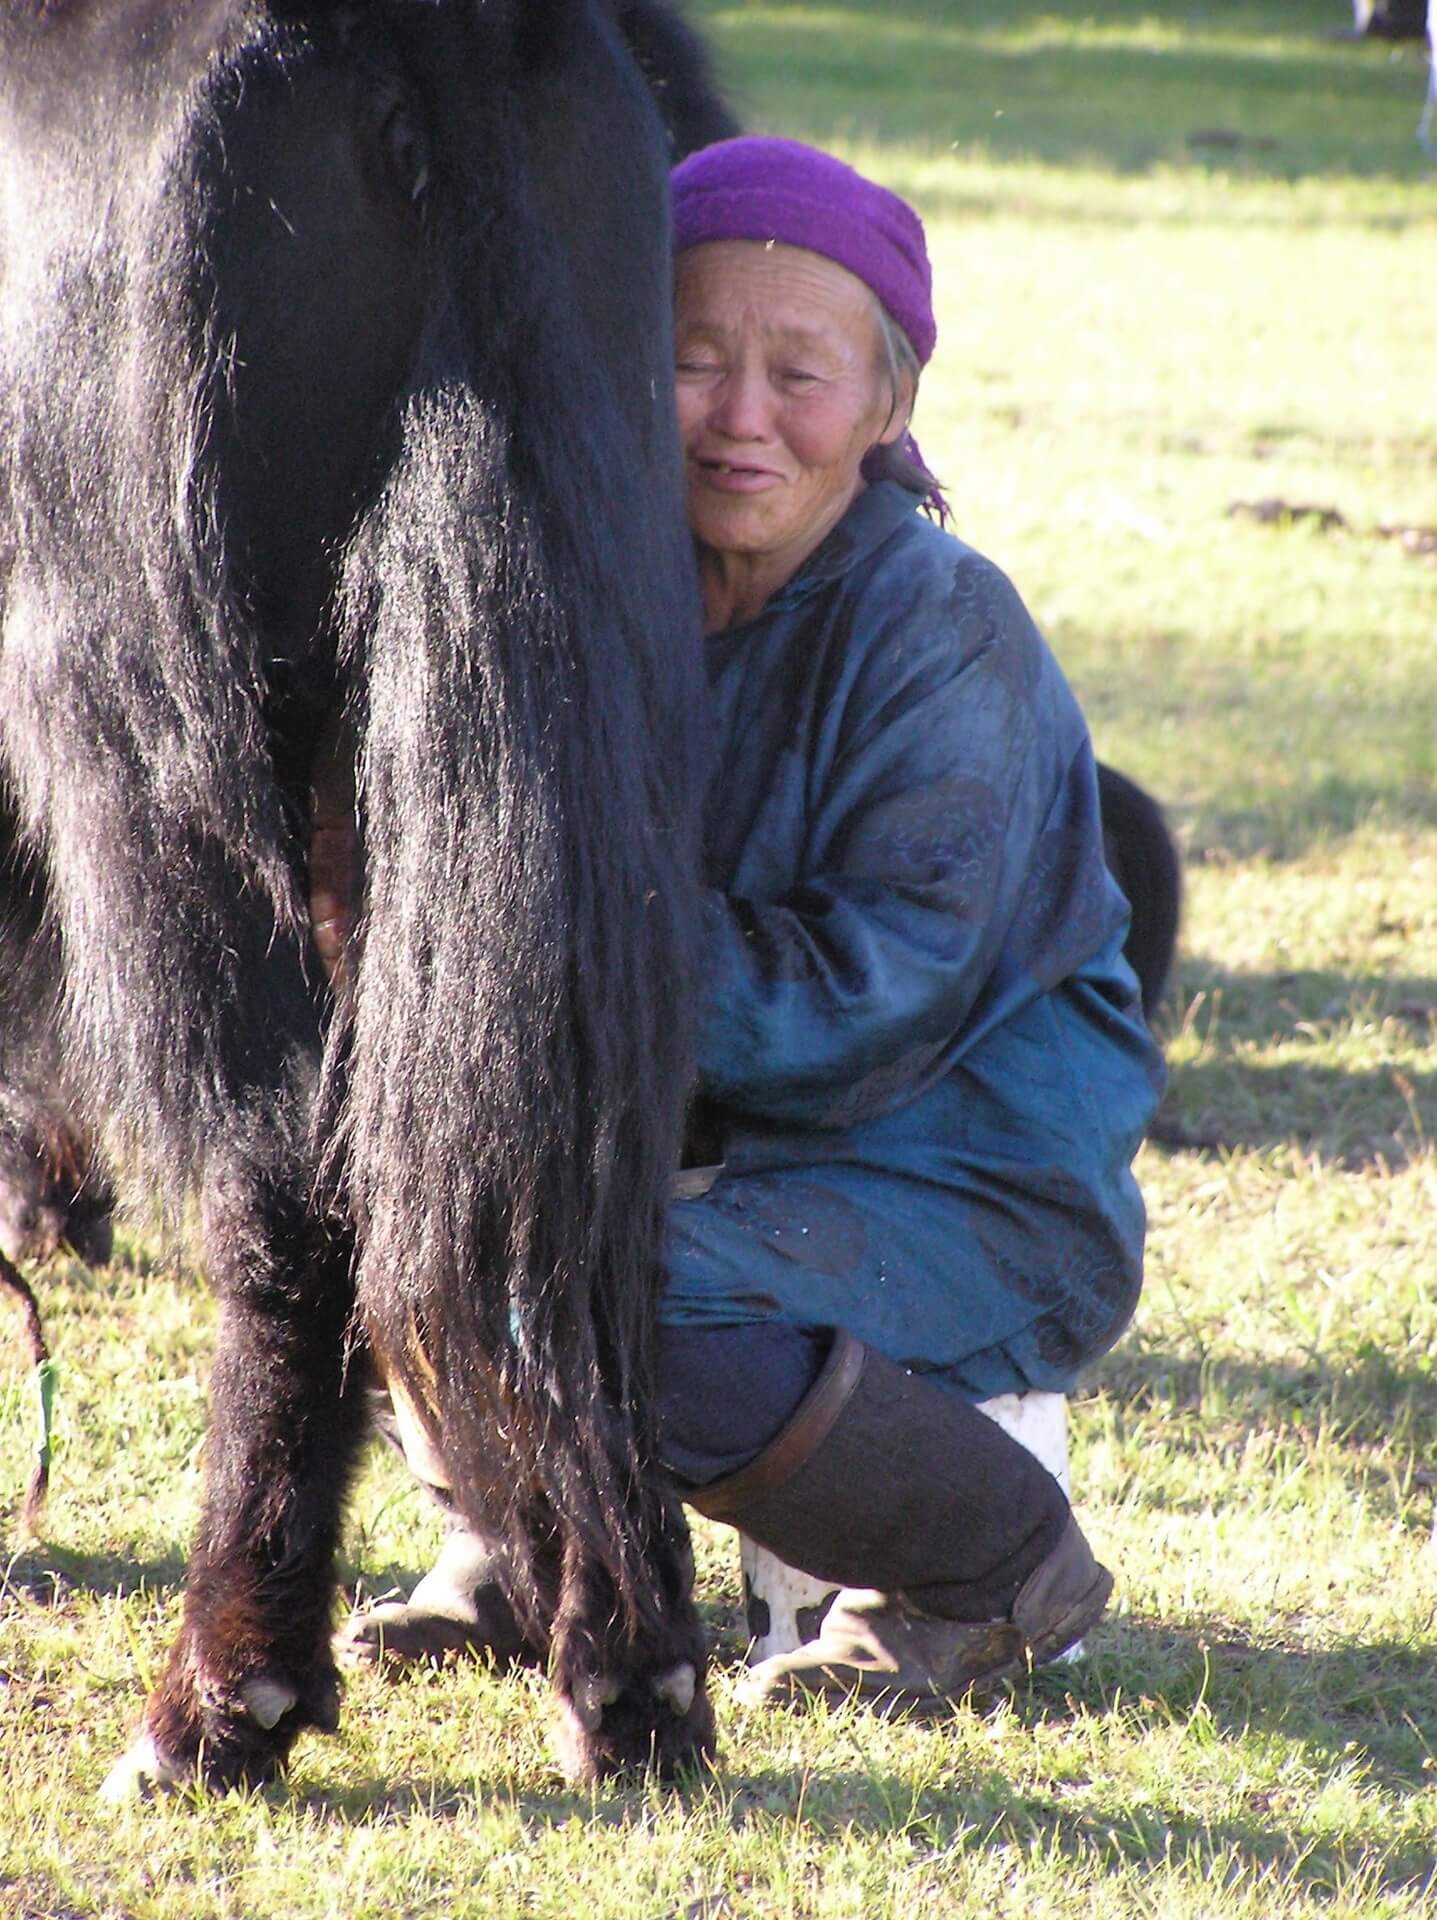 A Mongolian herder sings to soothe her yak and make milk flow more easily